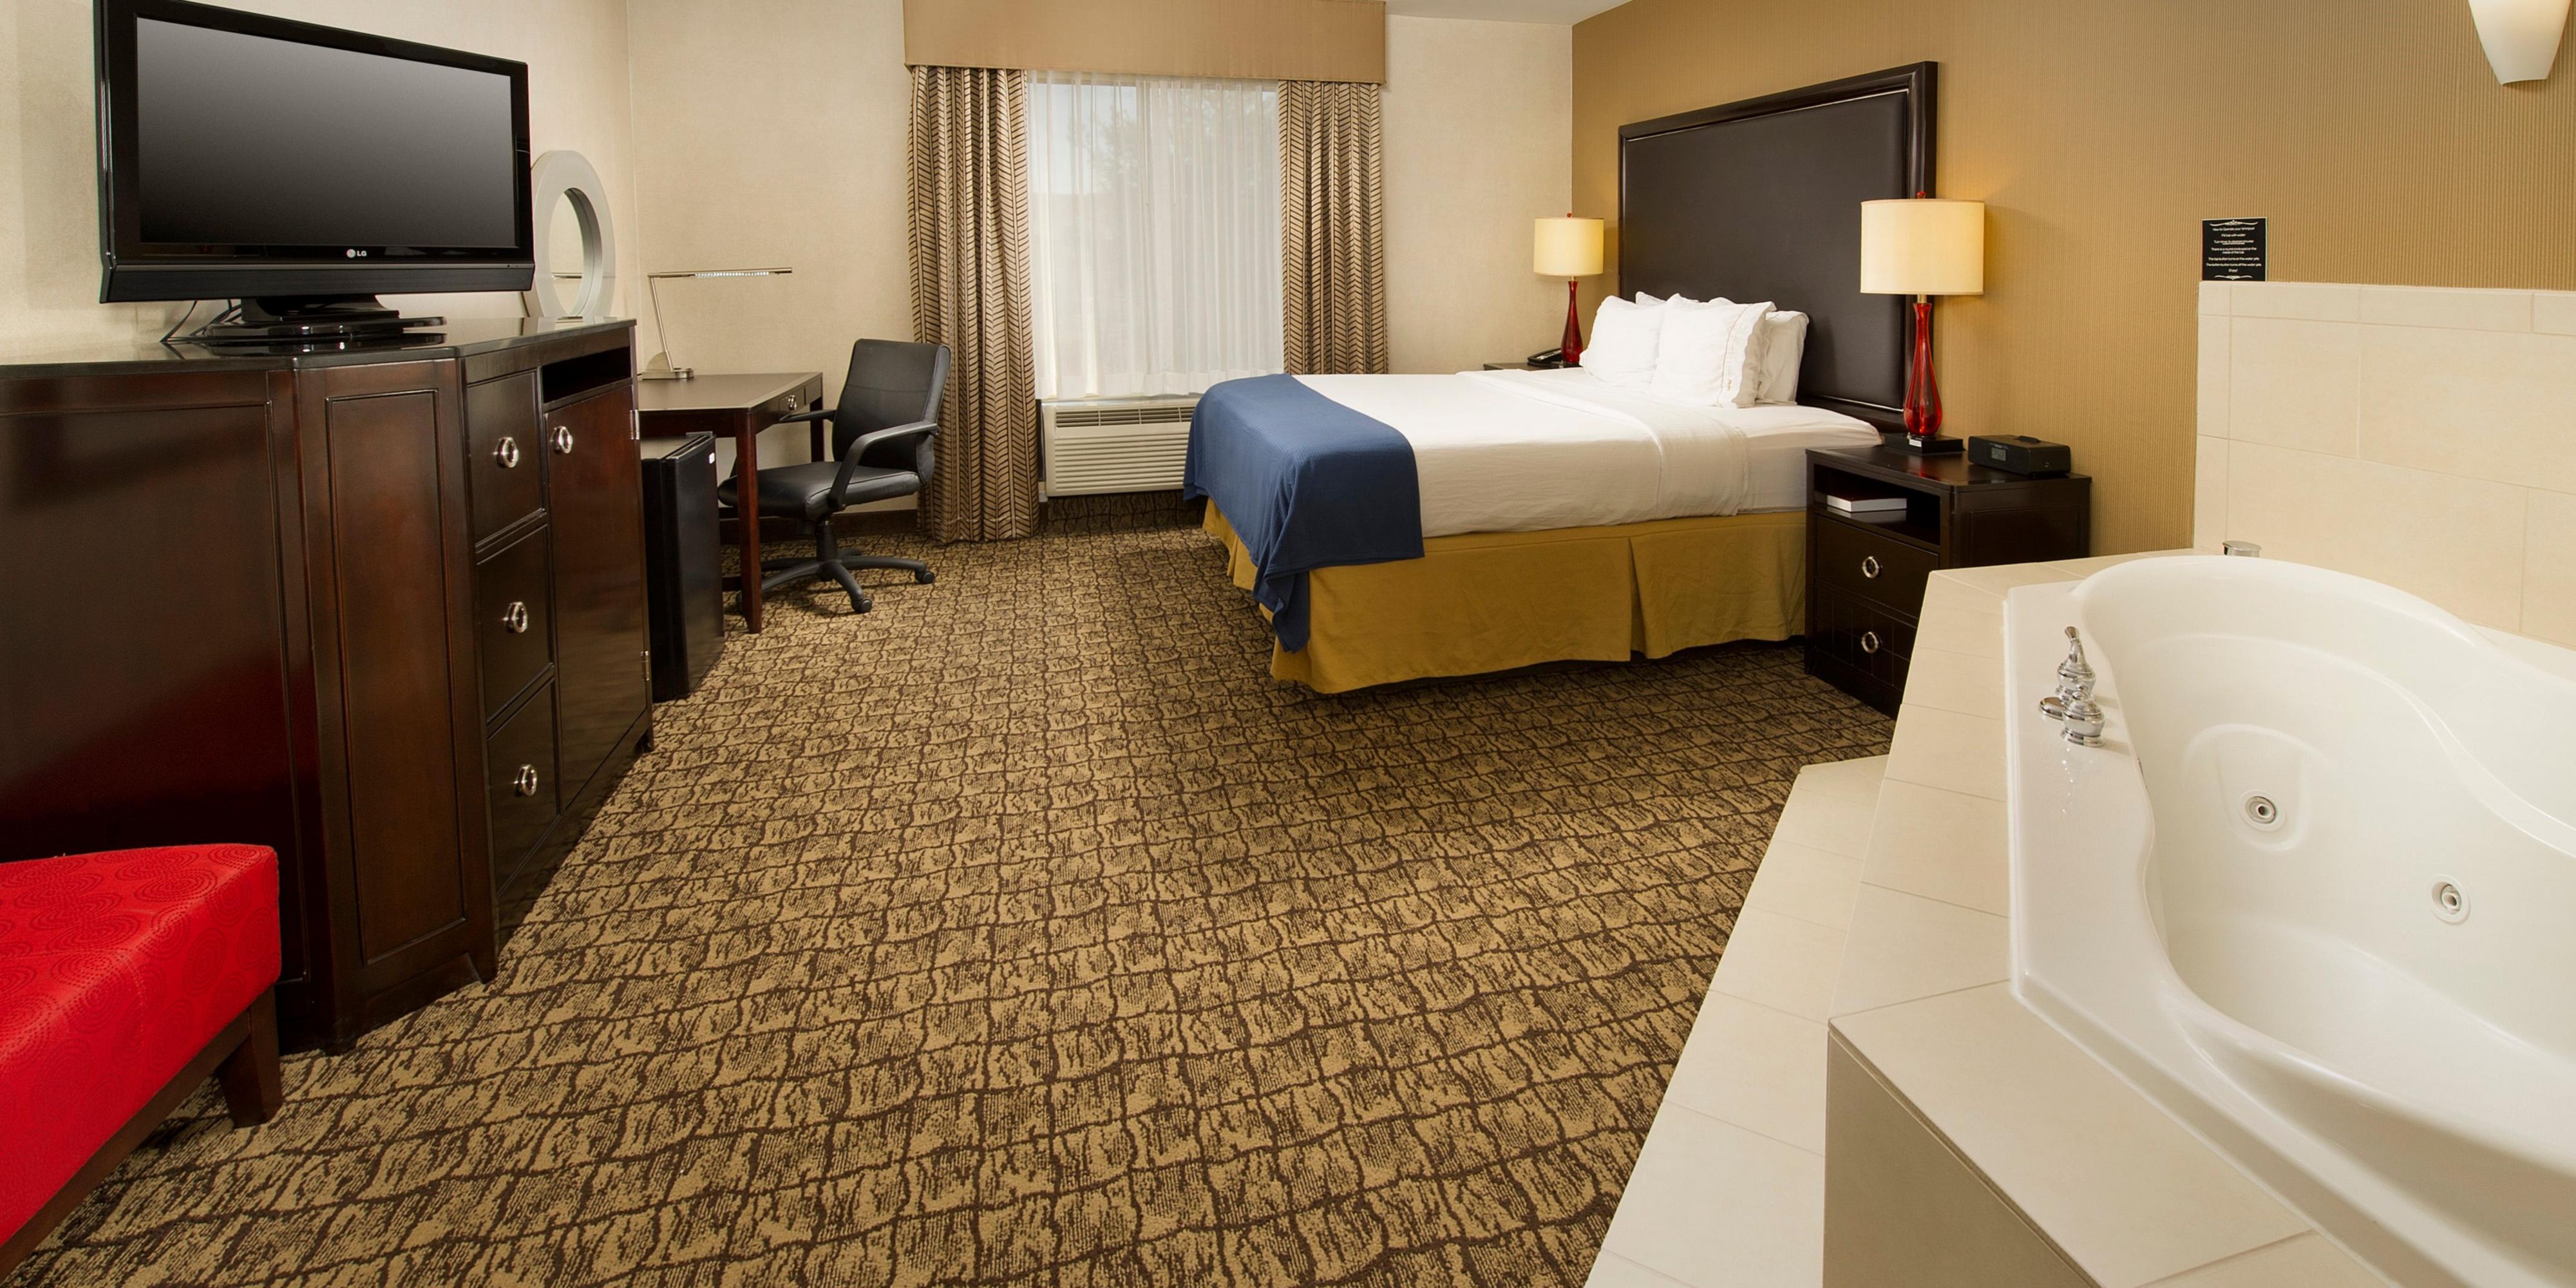 Come enjoy our King Whirlpool Suite, equipped with one king bed, a jetted tub, complimentary  Wi-Fi access, 55" LCD TV, work desk with an ergonomic chair, mini-fridge, coffee pot, hair dryer, iron and ironing board.